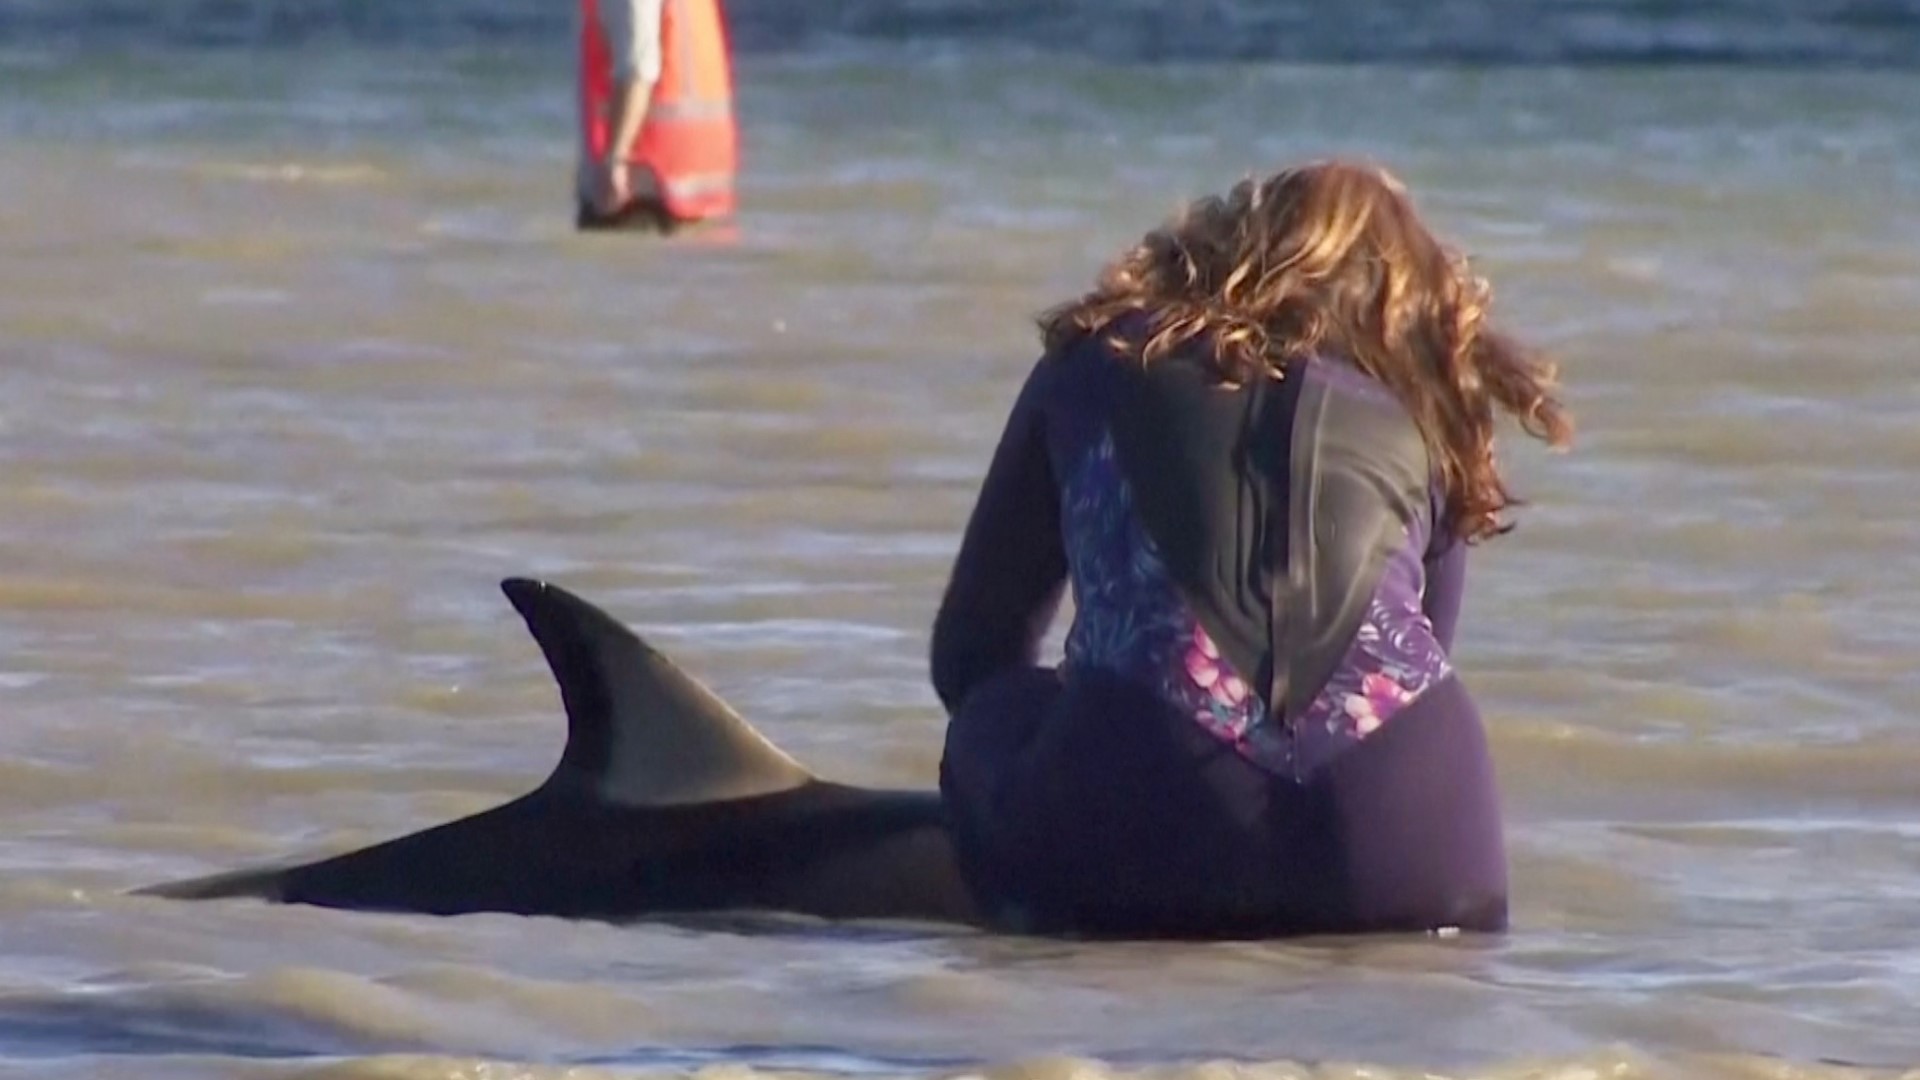 Volunteers in New Zealand did their best to rescue a pod of stranded dolphins. Buzz60's Maria Mercedes Galuppo has the story.